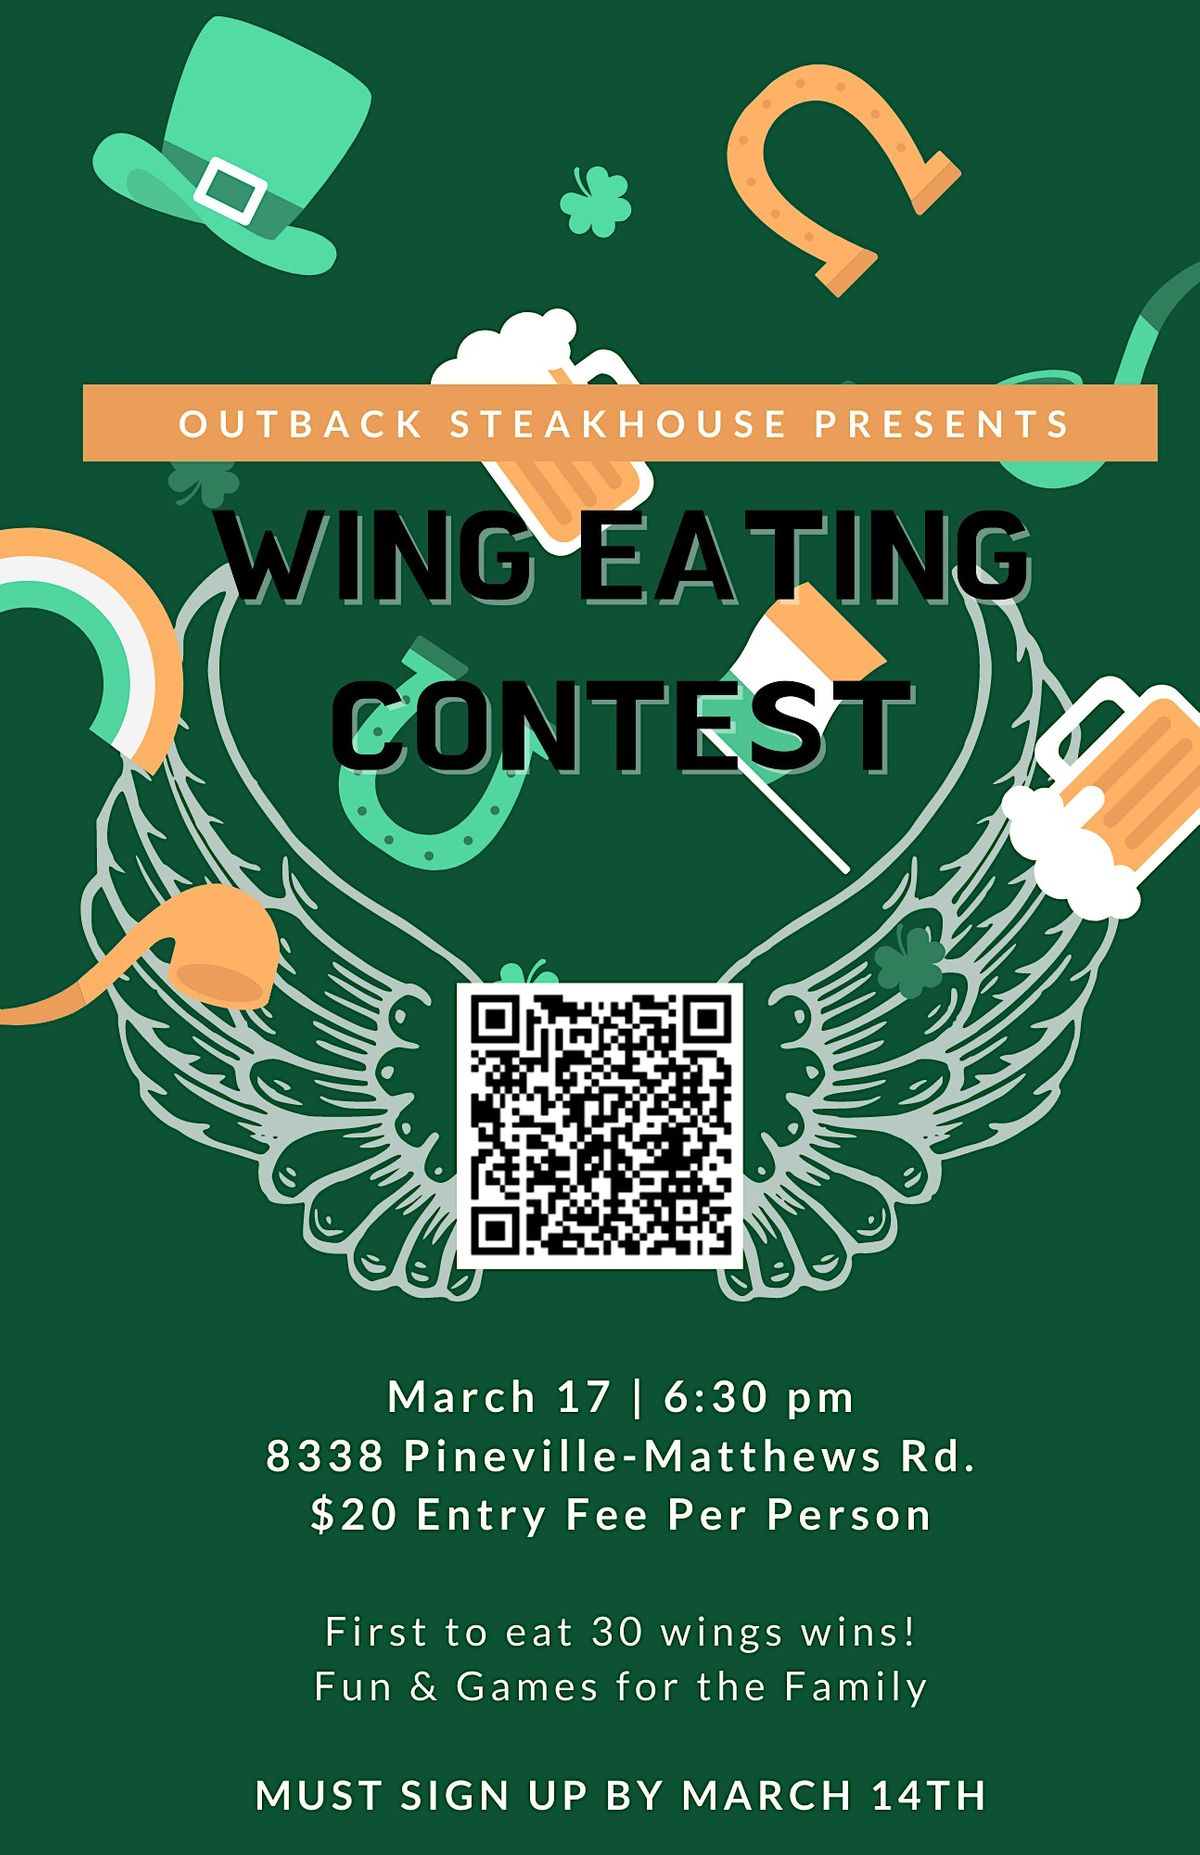 Outback Steakhouse Wing Eating Contest